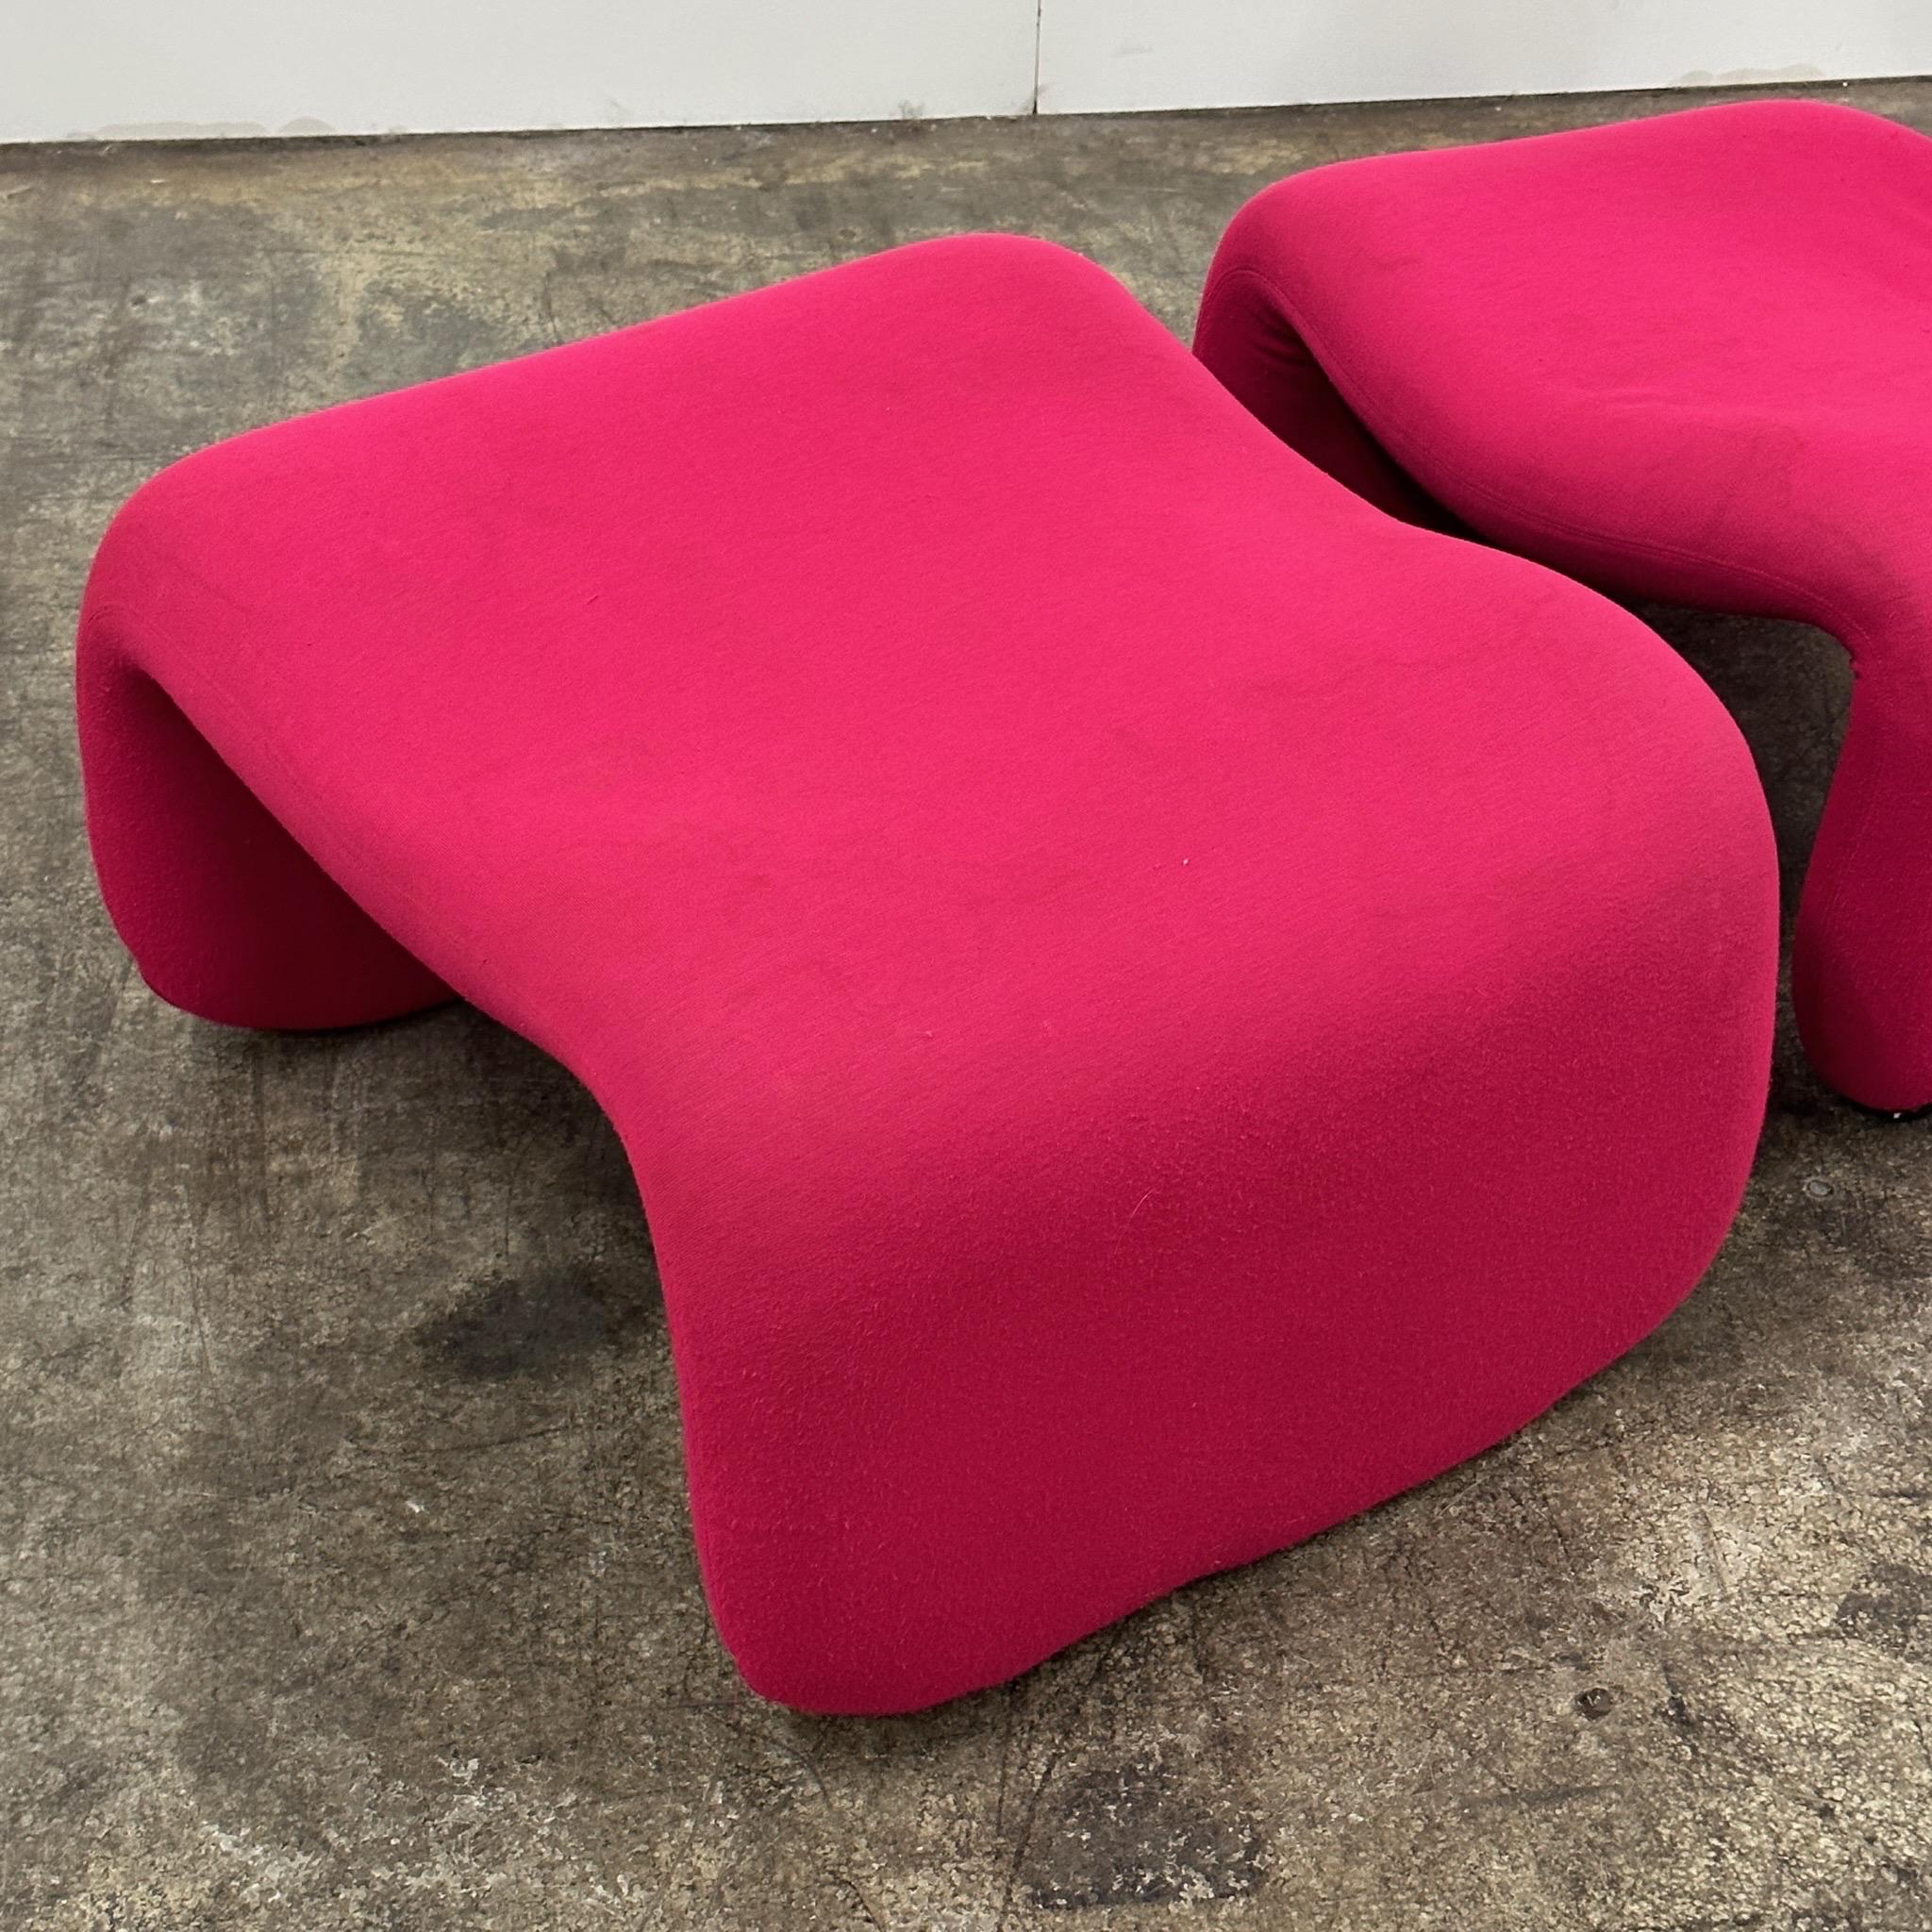 c. 1960s. Price is for the set. Extremely rare set made in France. As seen in 2001: A Space Odyssey. Original pink upholstery. Unsigned.